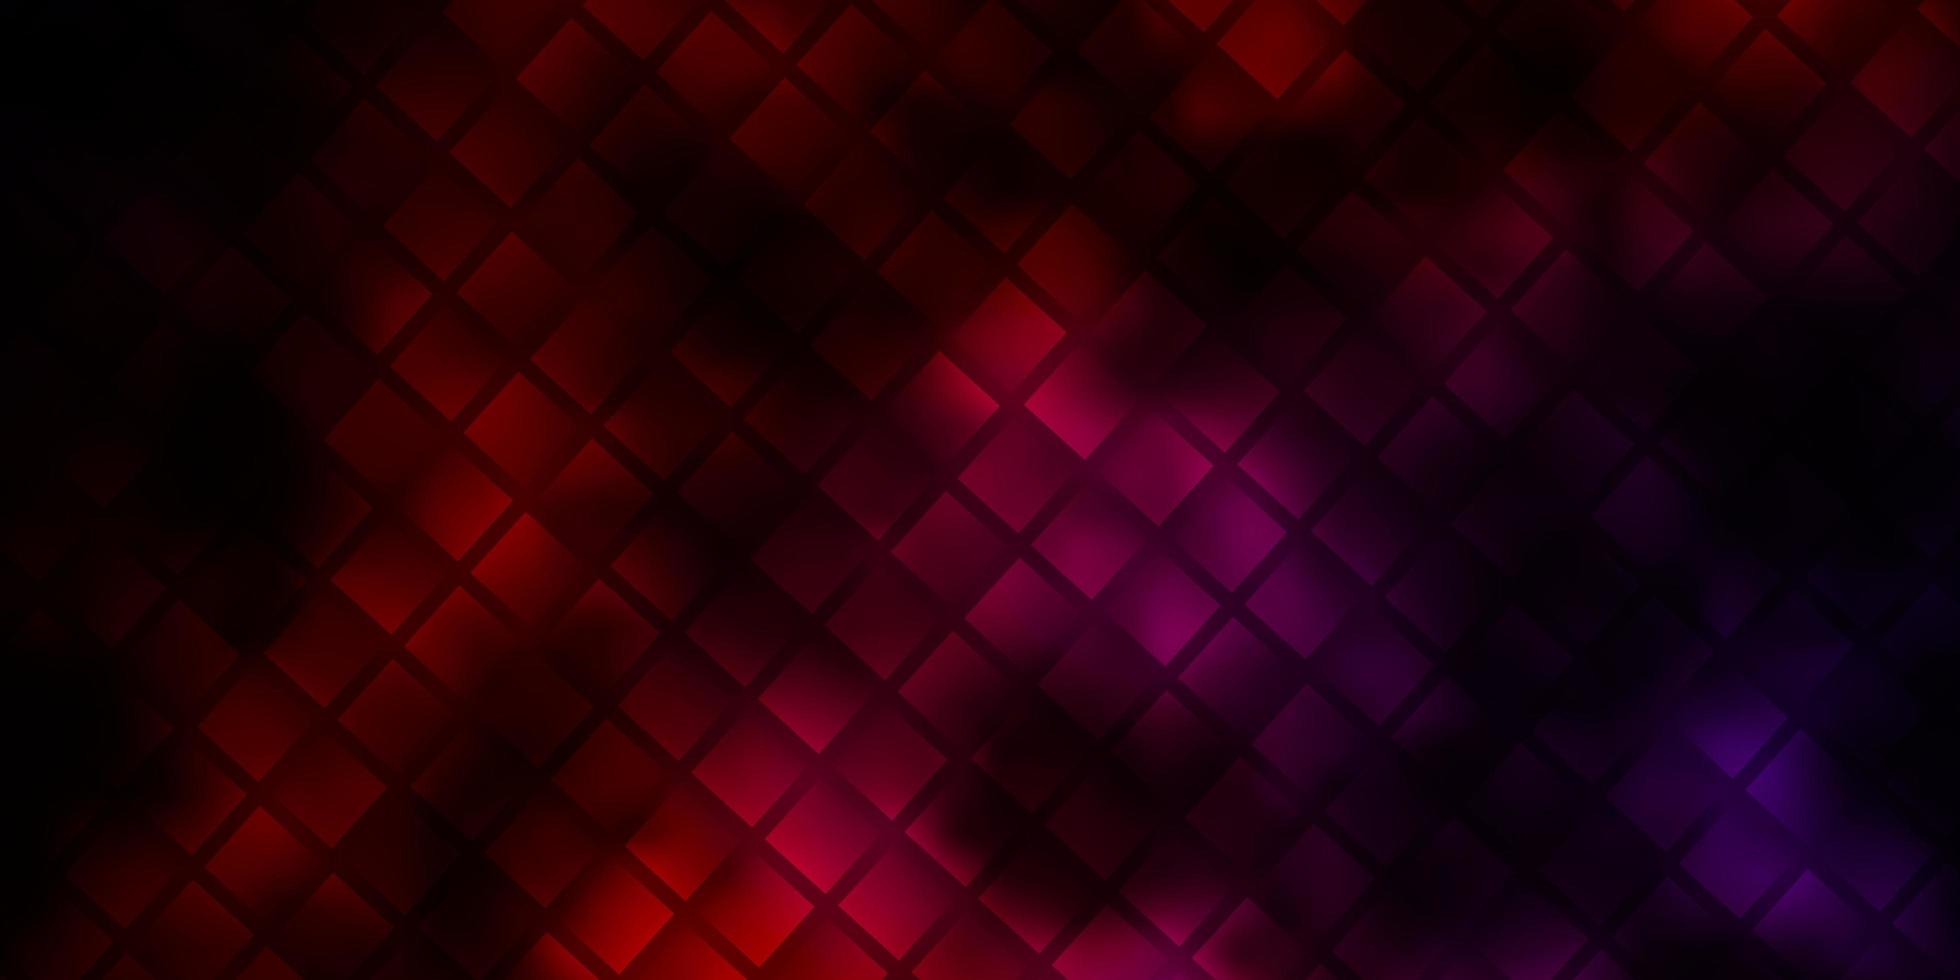 Dark Pink, Red vector background with rectangles.